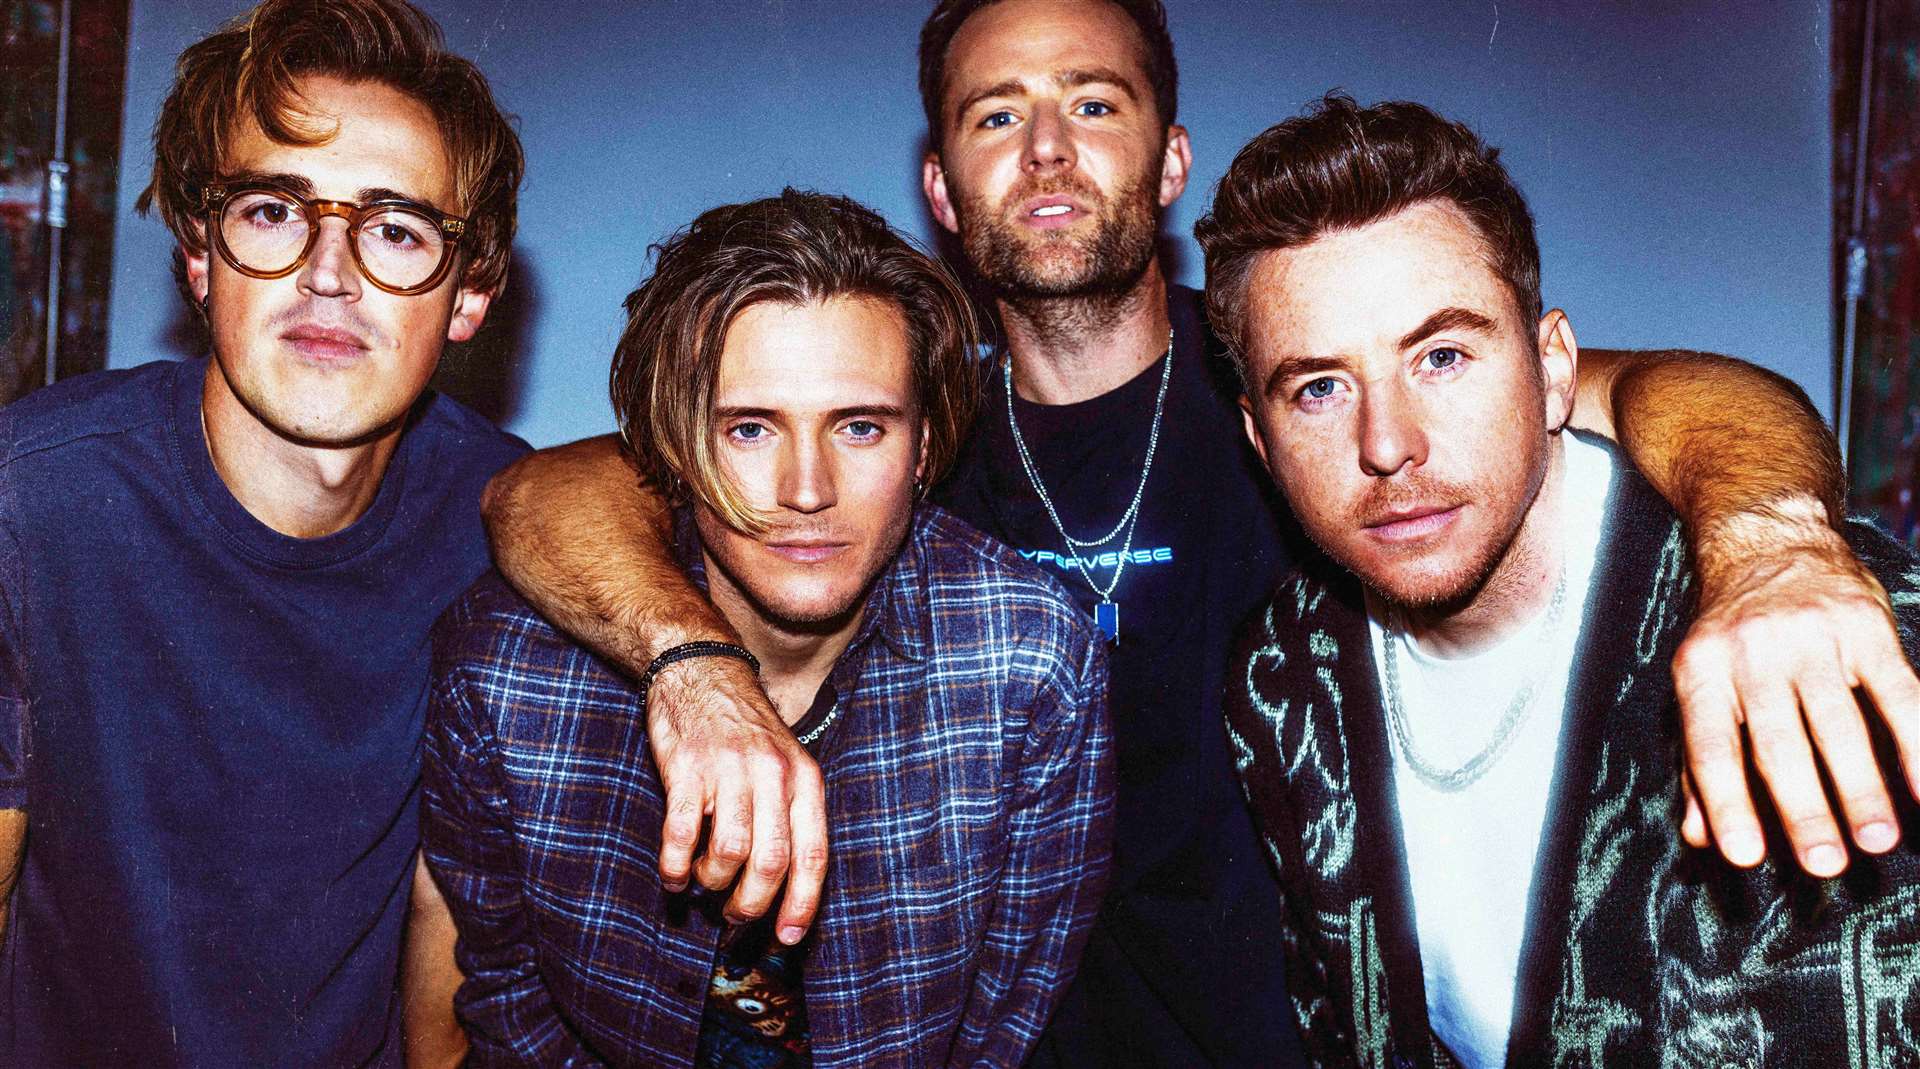 Chart-topping boyband McFly are one of the artists coming to Dreamland this summer